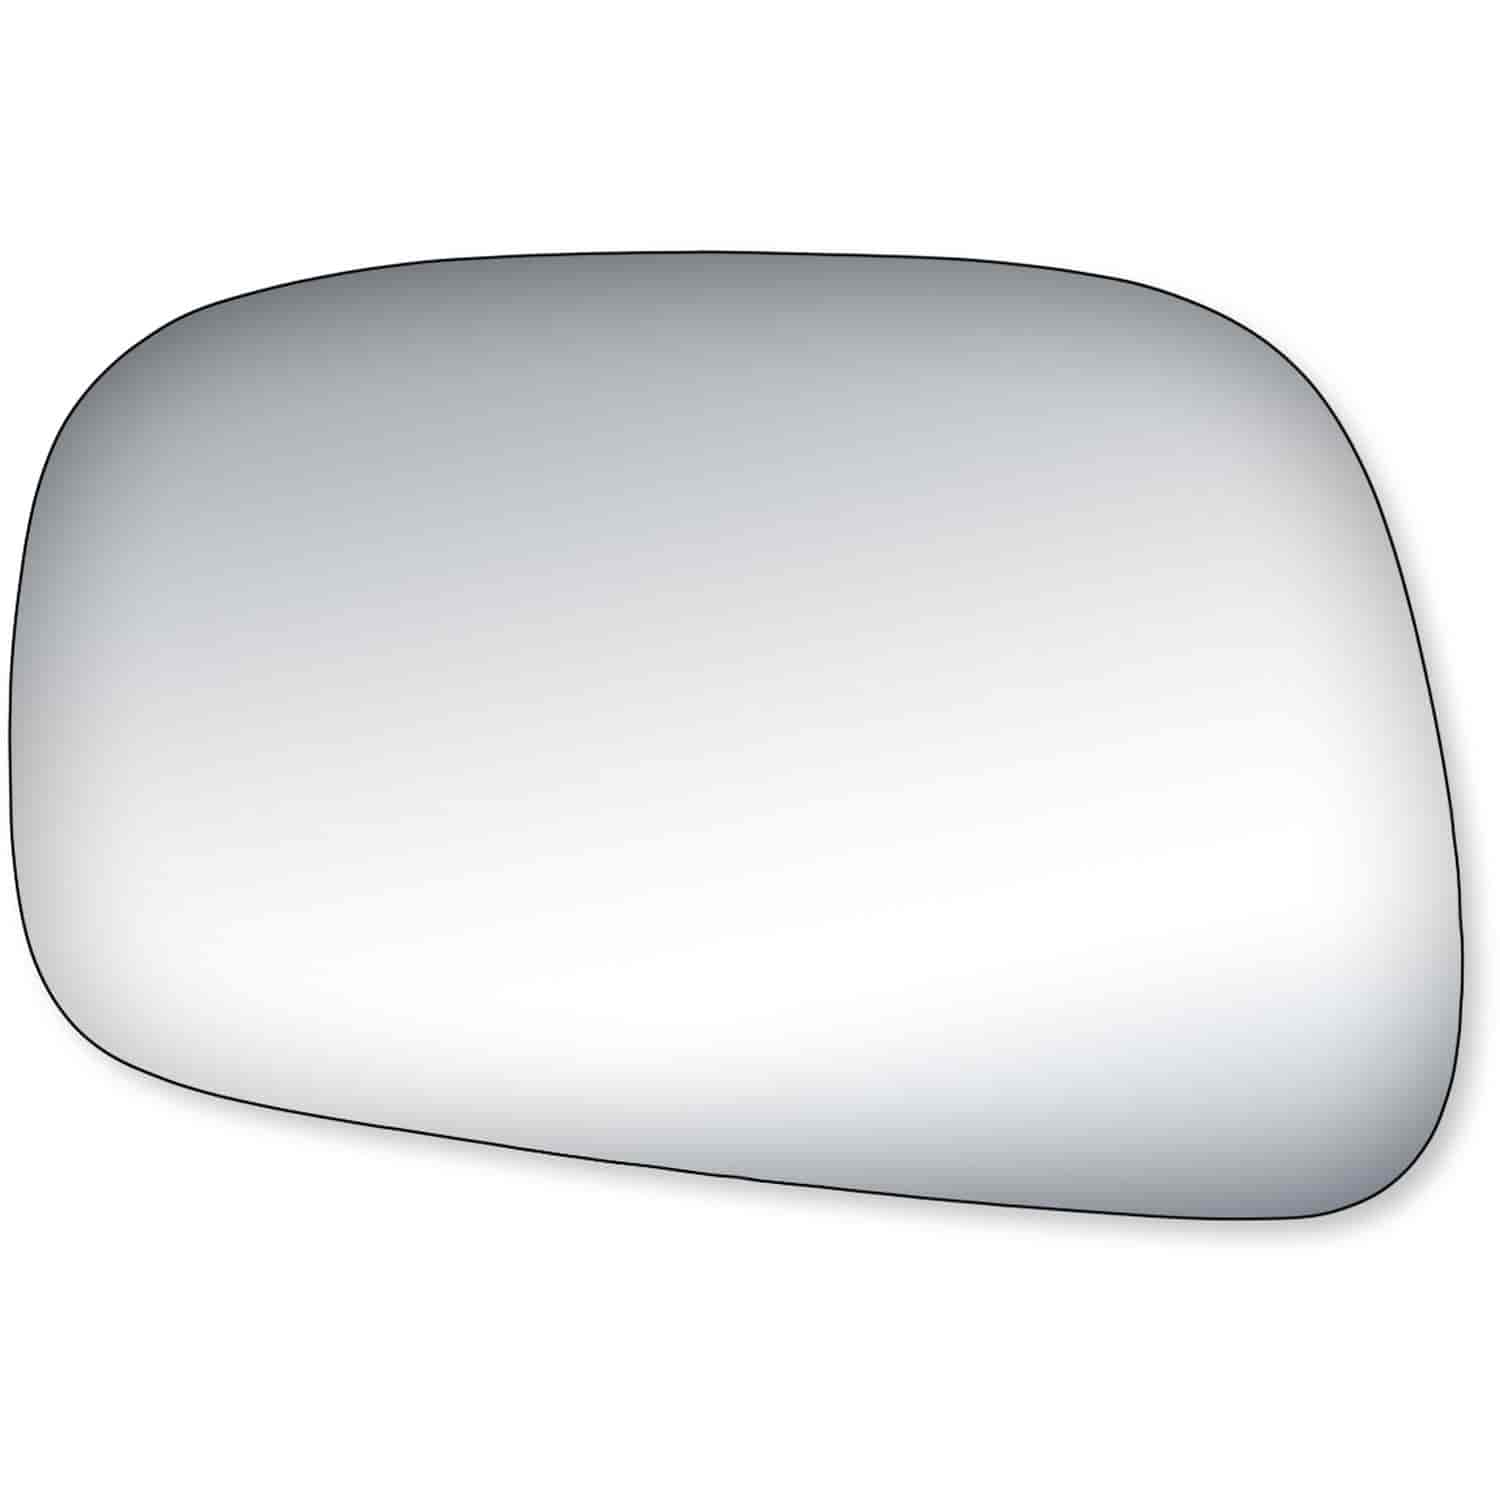 Replacement Glass for 02-06 Camry Sedan US Built the glass measures 4 1/4 tall by 6 1/2 wide and 7 d